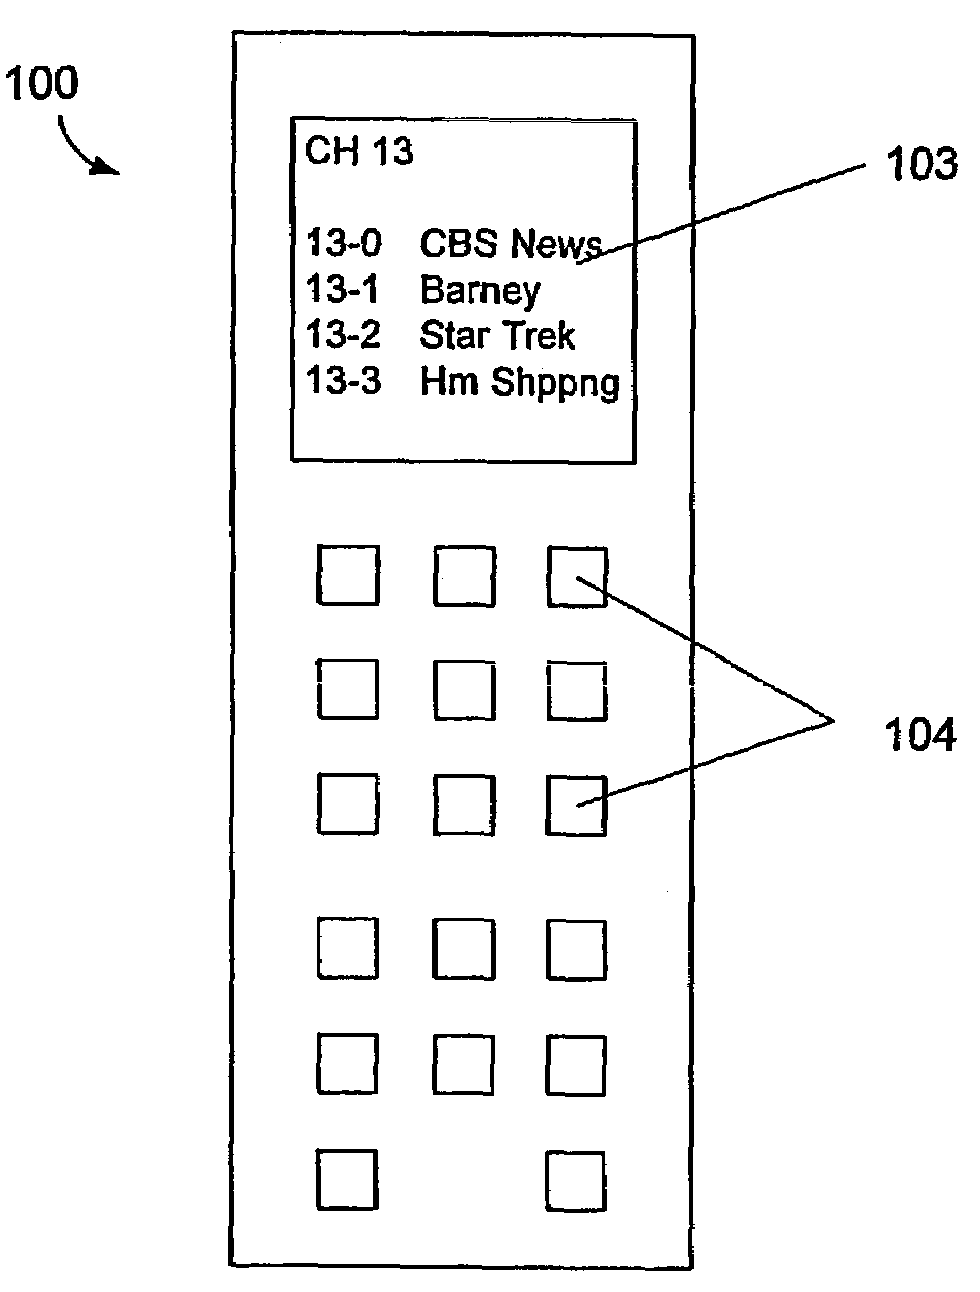 Bi-directional remote control unit and method of using the same